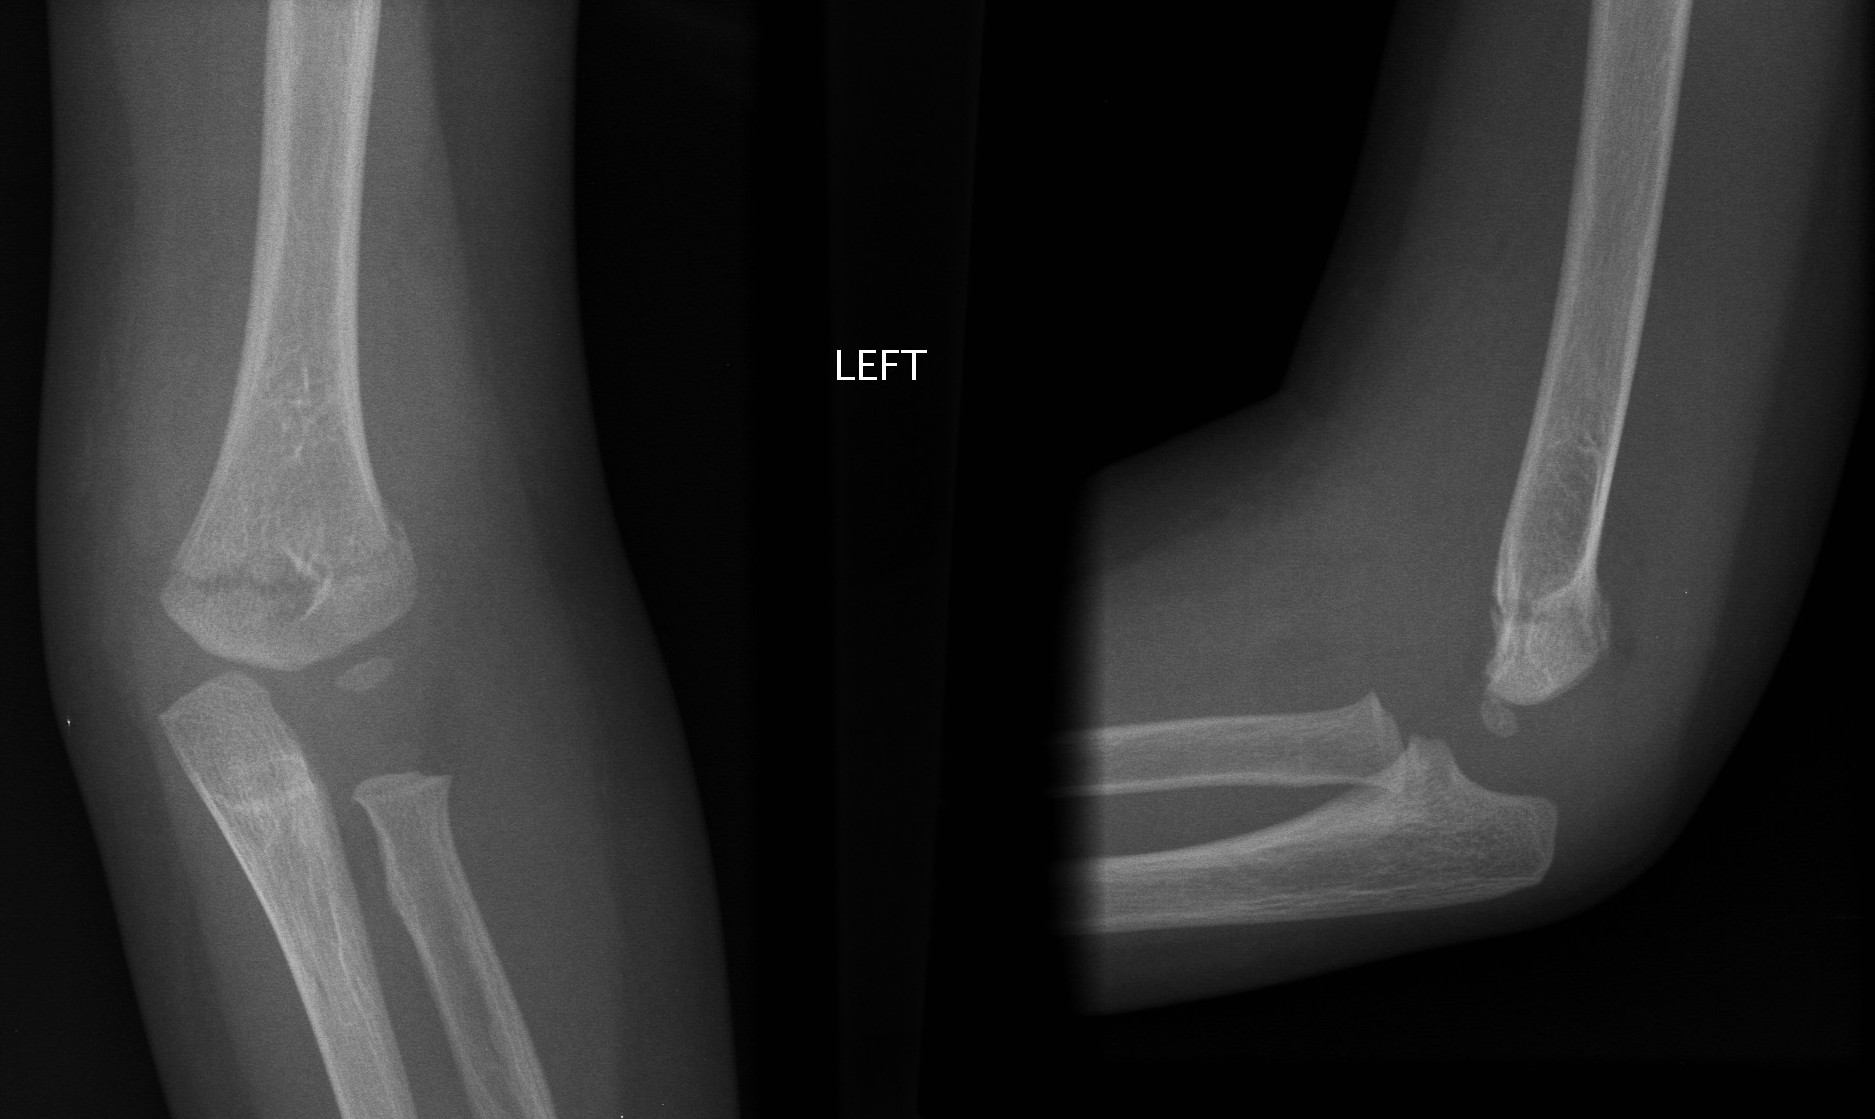 Supracondylar fracture with posterior angulation